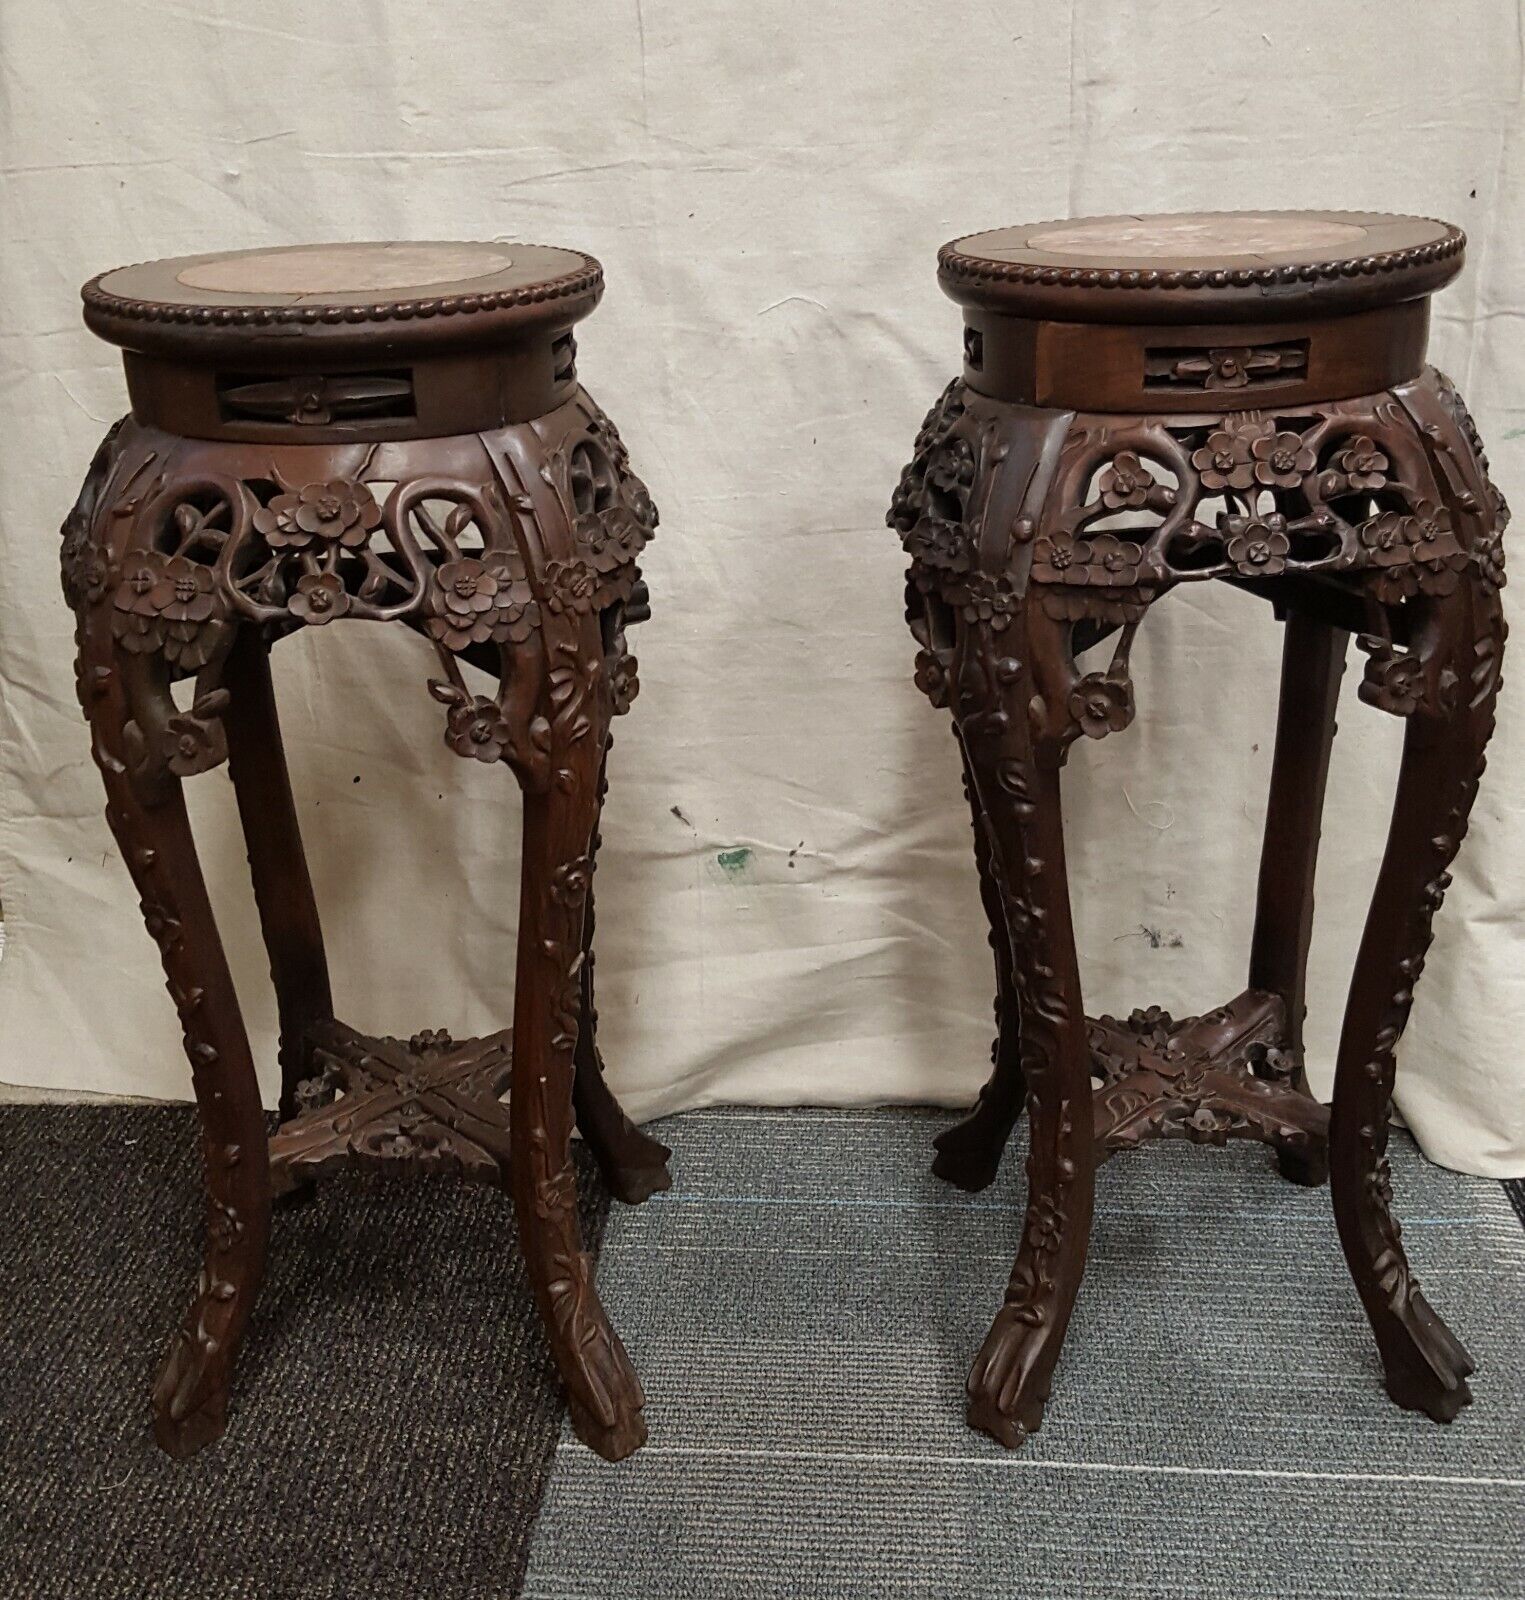 Pair Of Antique Chinese Carved Rosewood Marble Top Plant Stands/Side Tables  | Ebay Inside Carved Plant Stands (View 4 of 15)